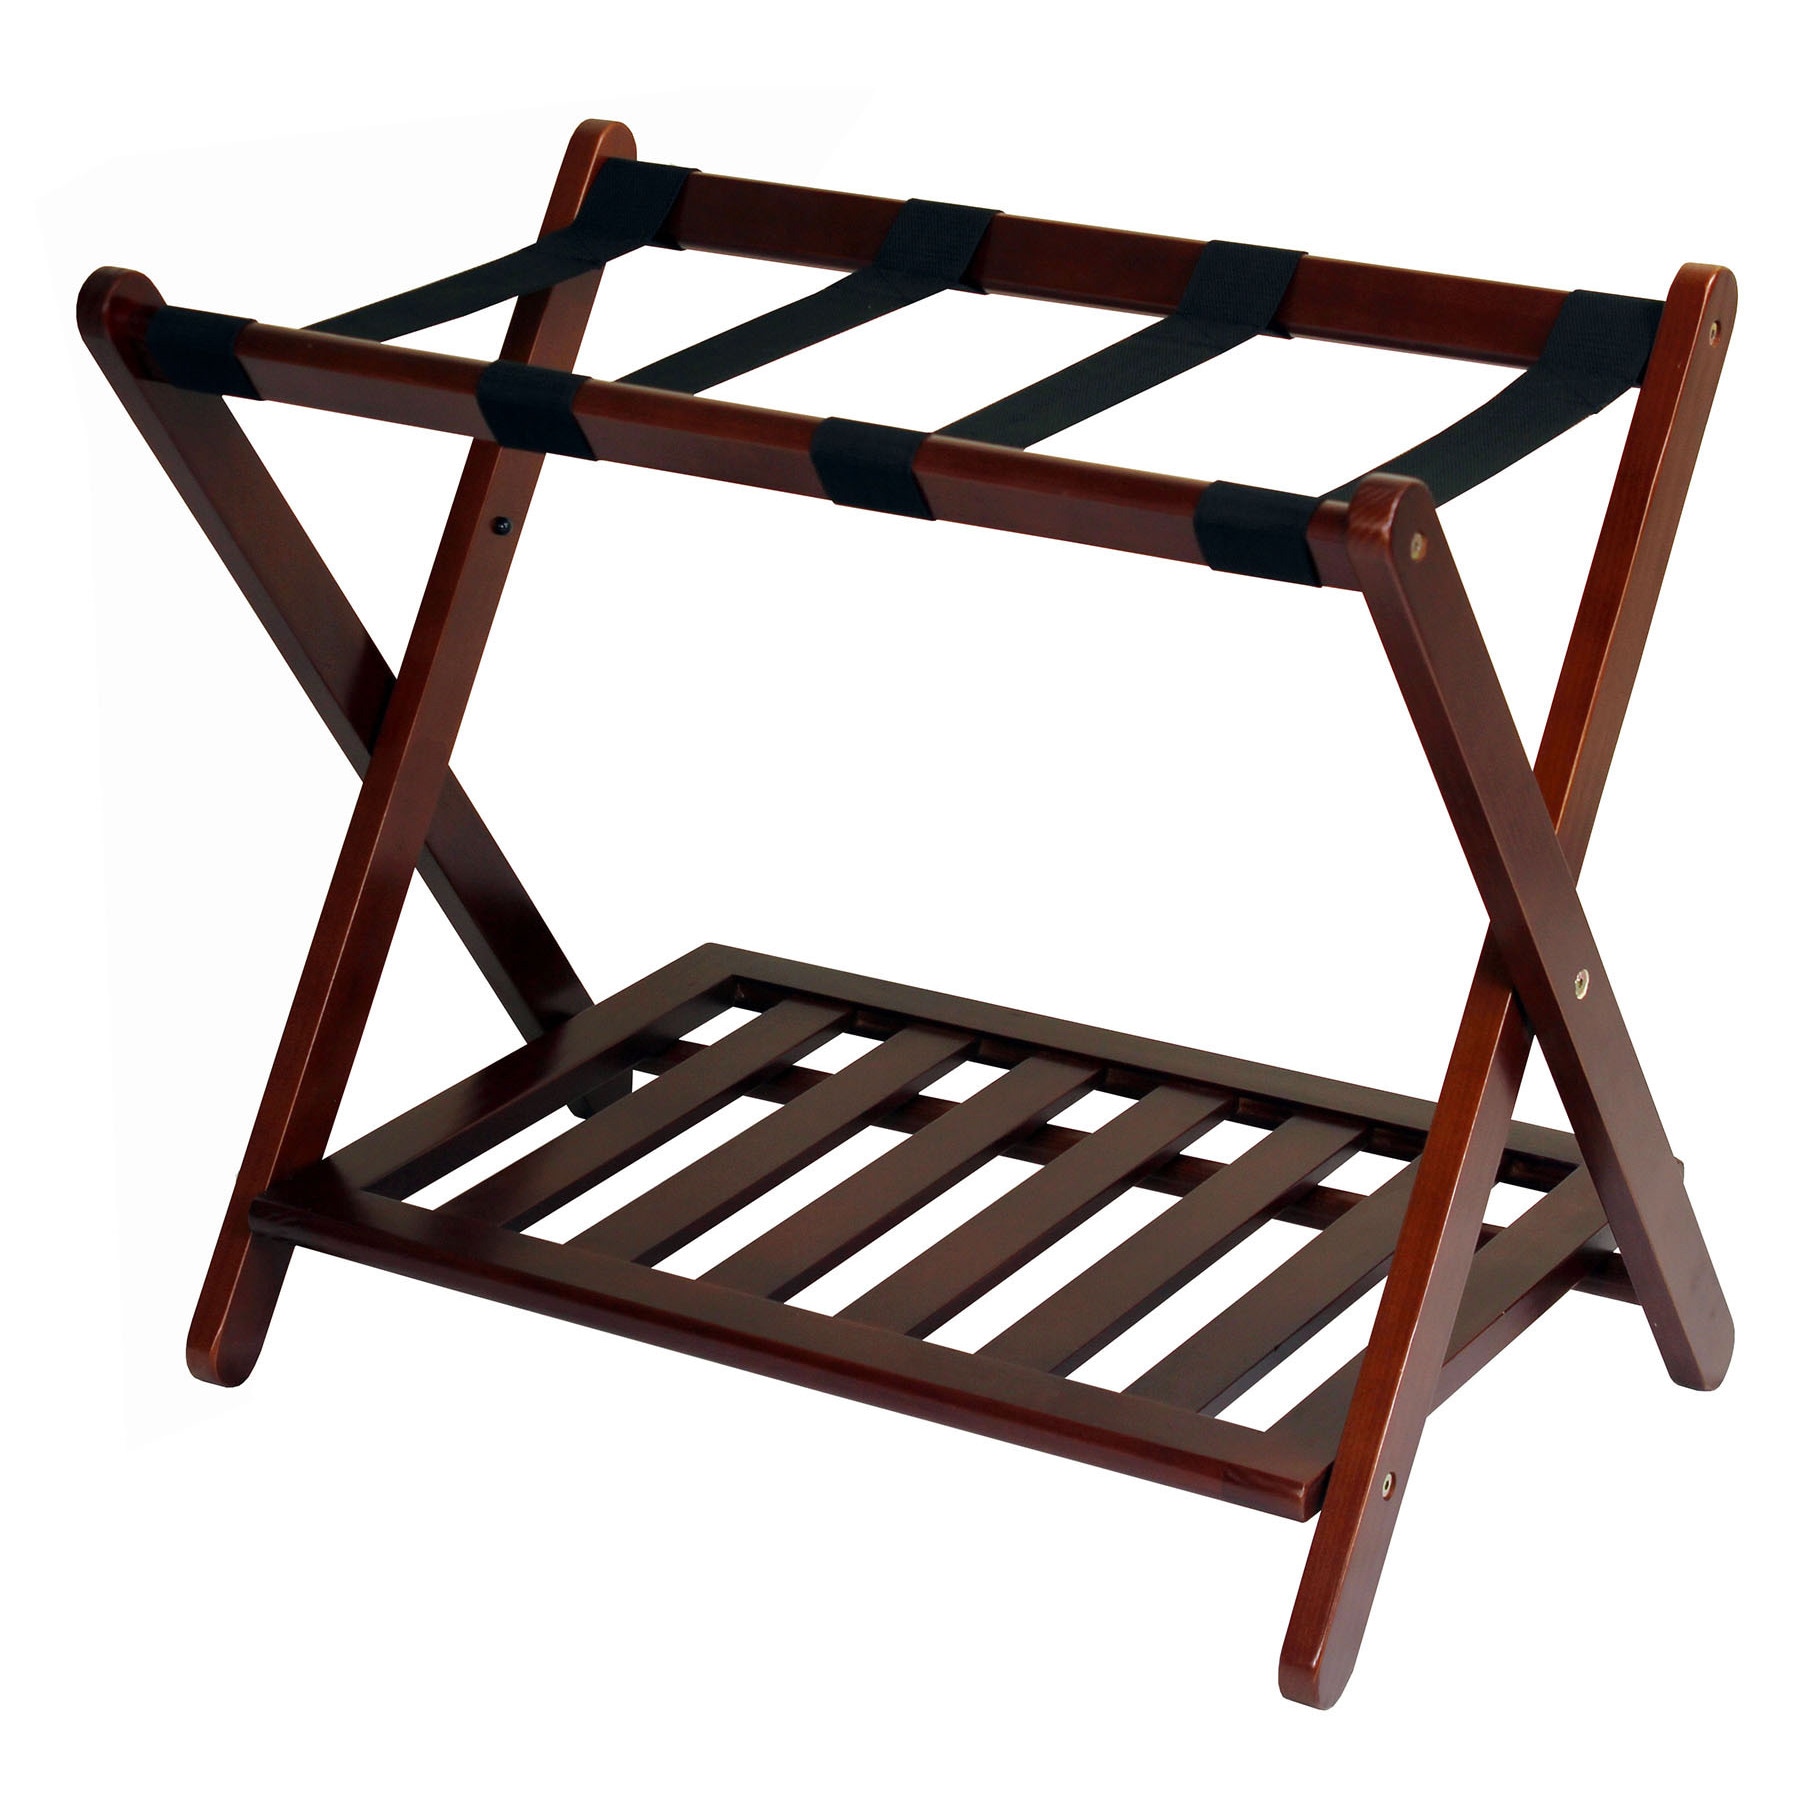 Hotel style Luggage Rack with Shelf   Shopping   Great Deals